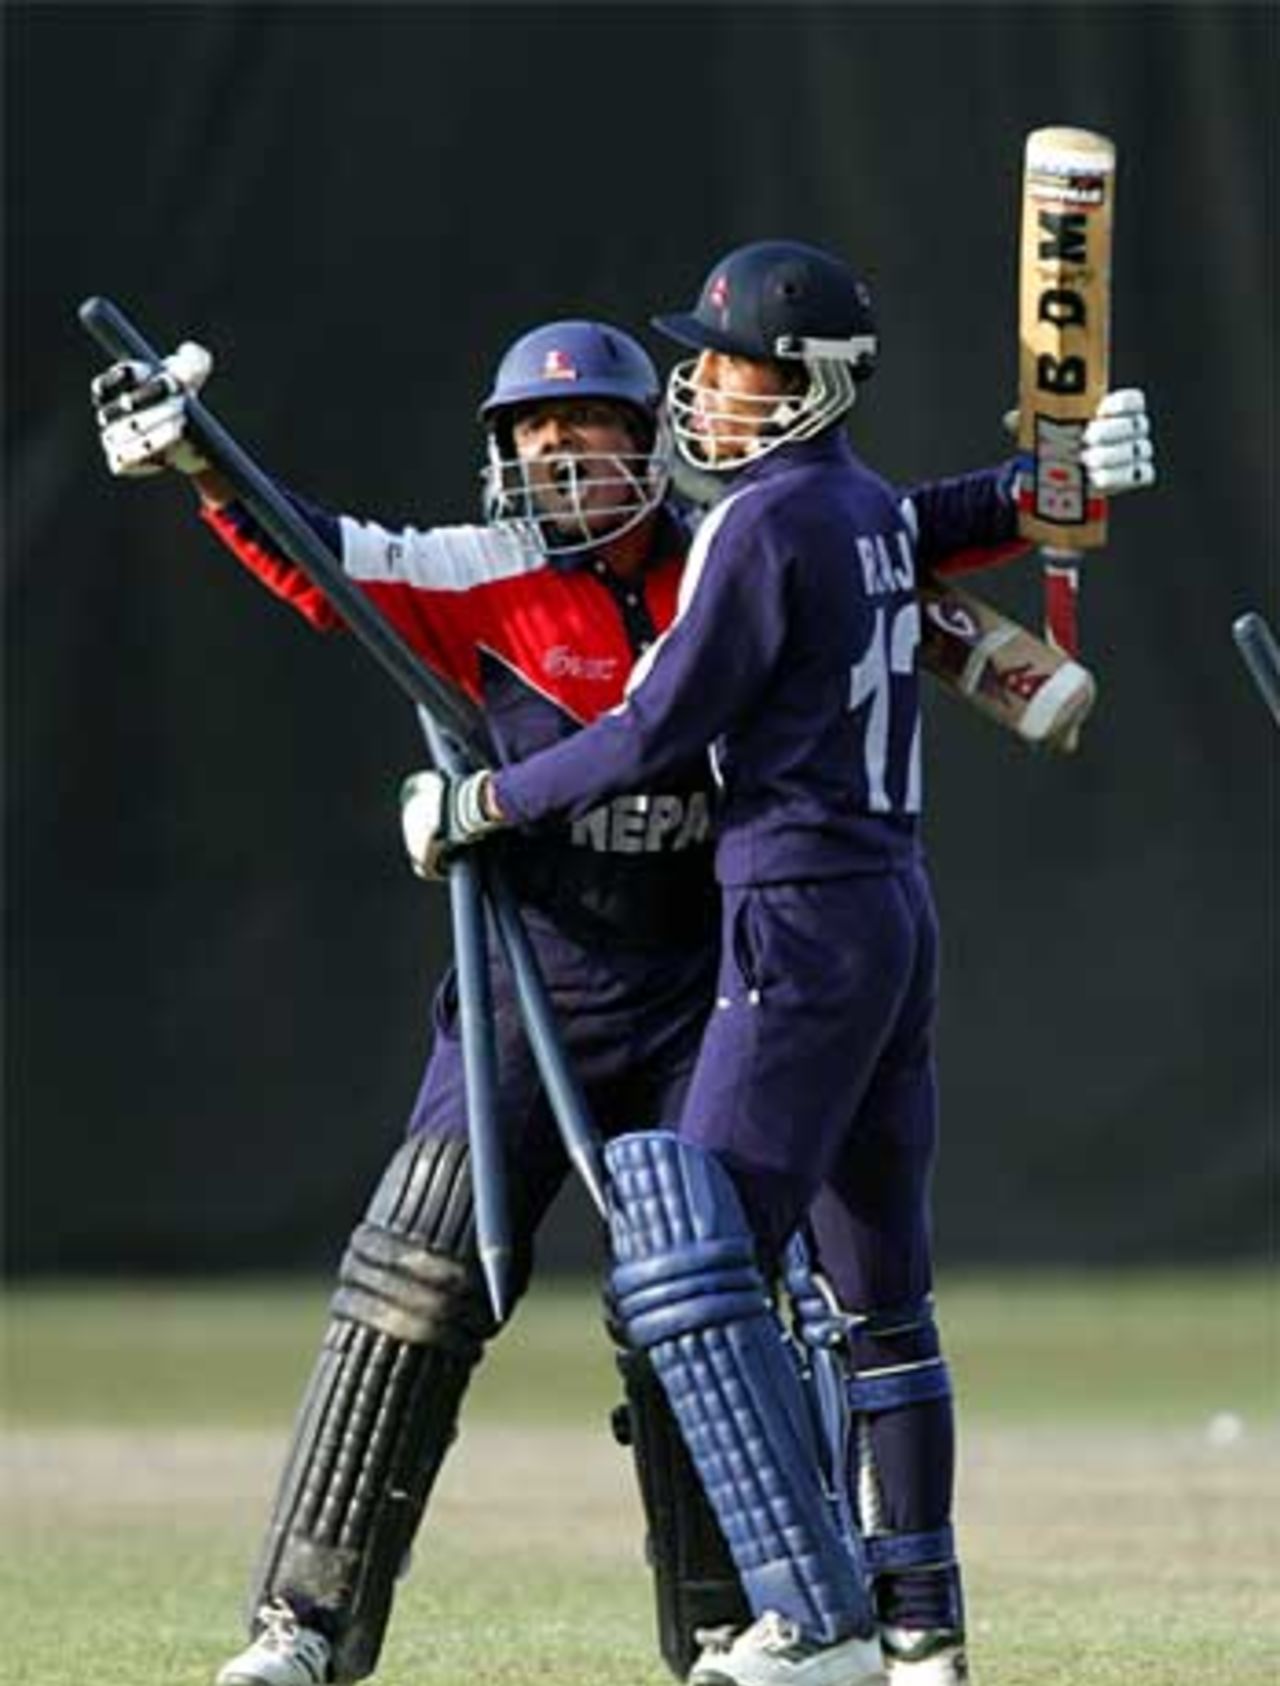 Ratan Rauniyar and Raj Shrestha embrace after Nepal's one-wicket win, Nepal v New Zealand, Under-19 World Cup Plate Final, Colombo, February 18, 2006